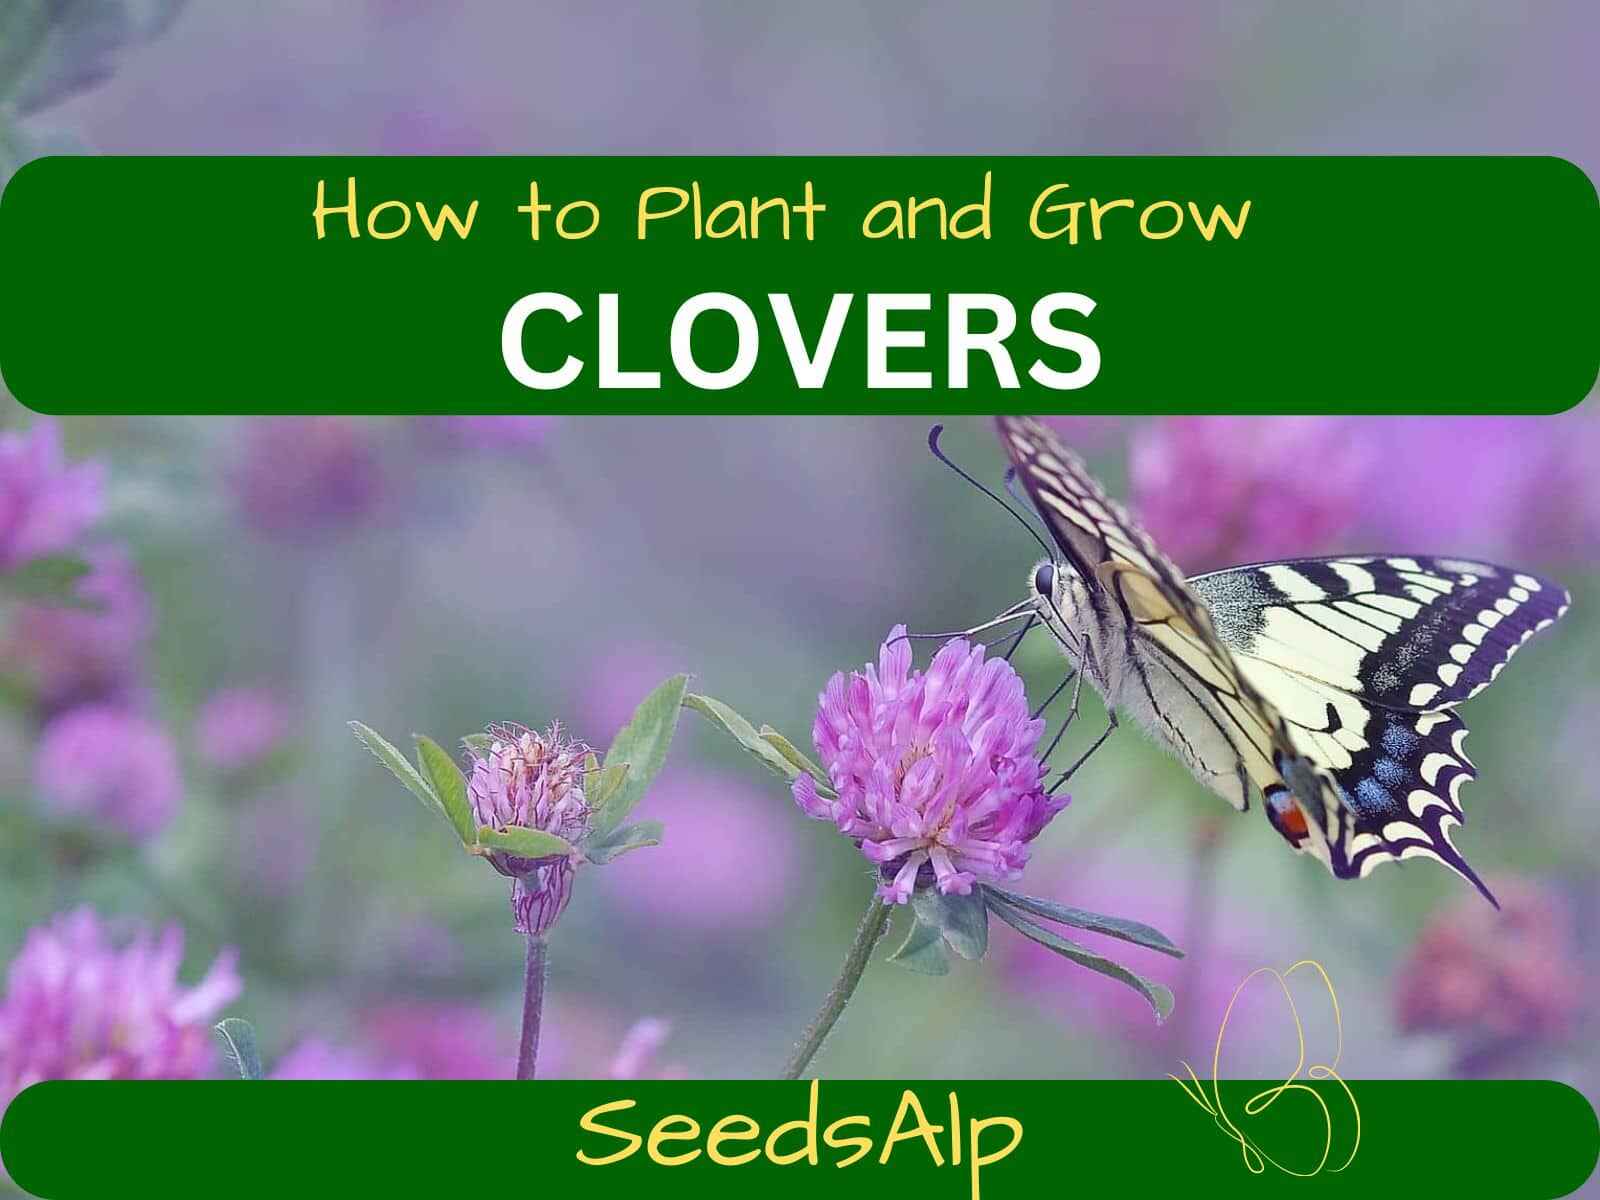 Growing Clover How to Growi Clover